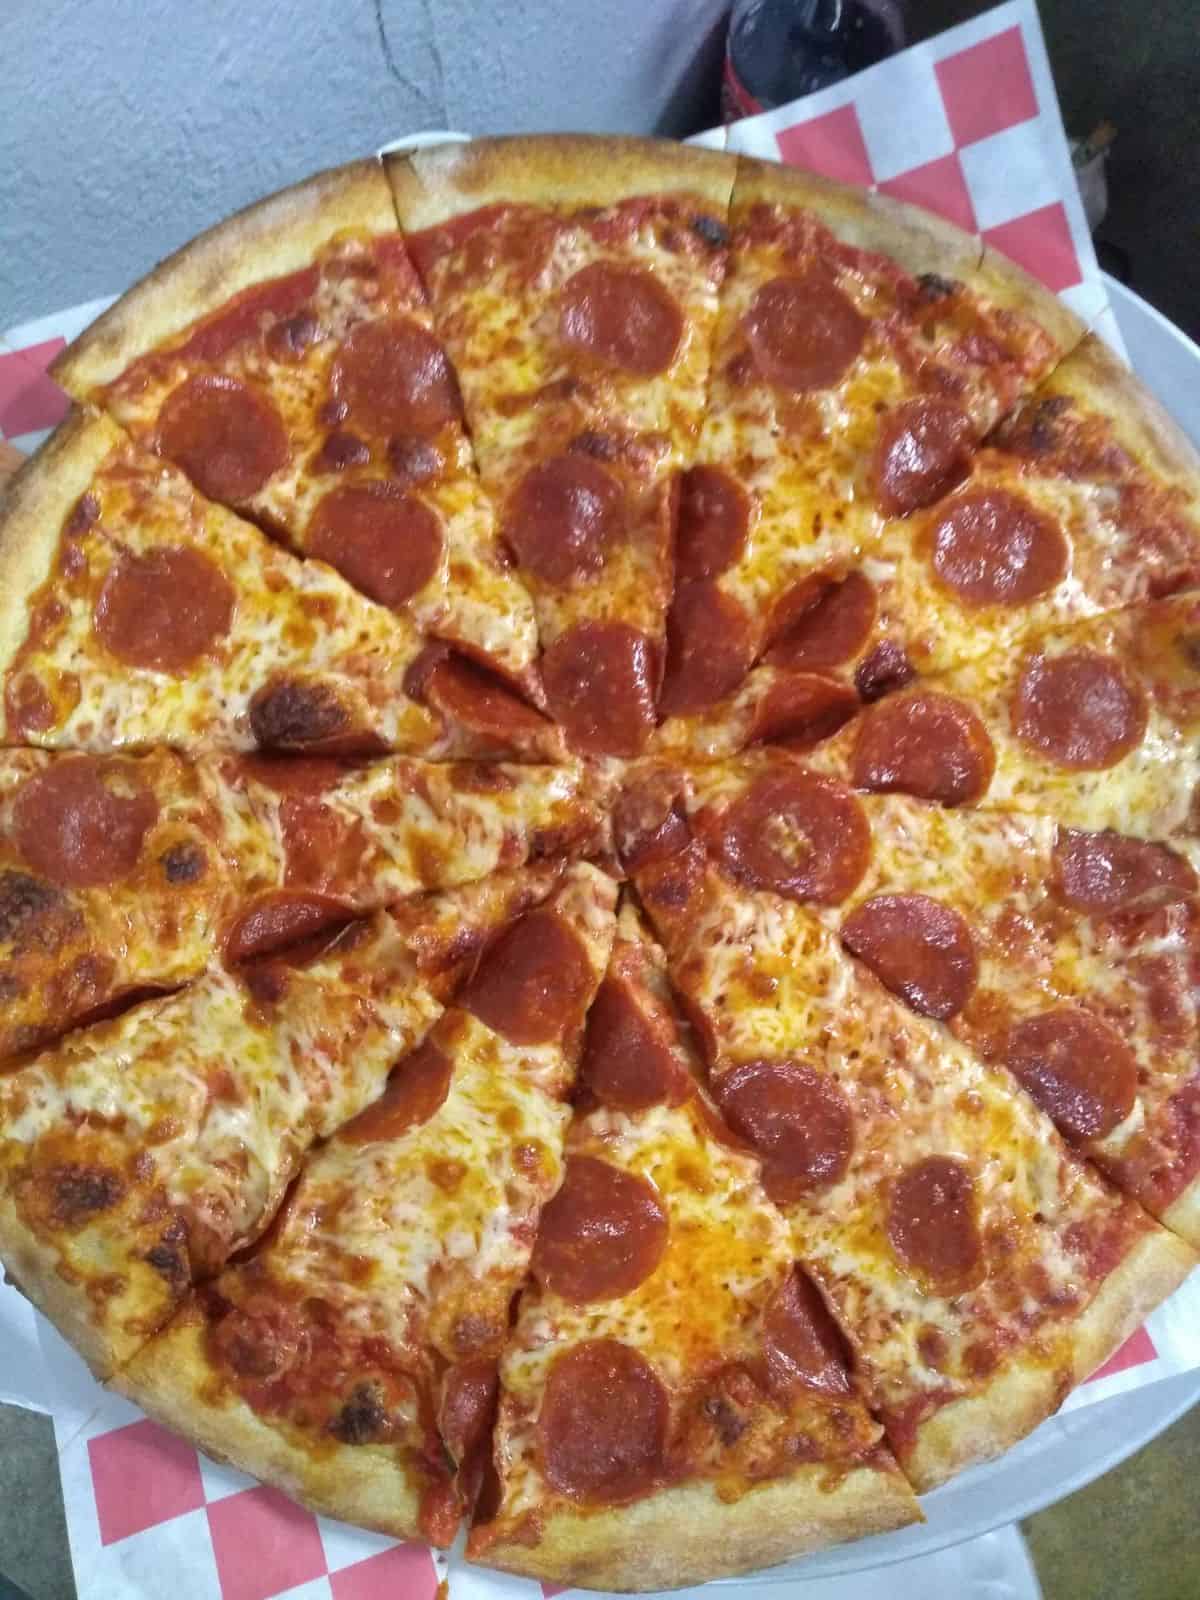 A pepperoni pizza on a metal pan with white paper with red squares underneath.